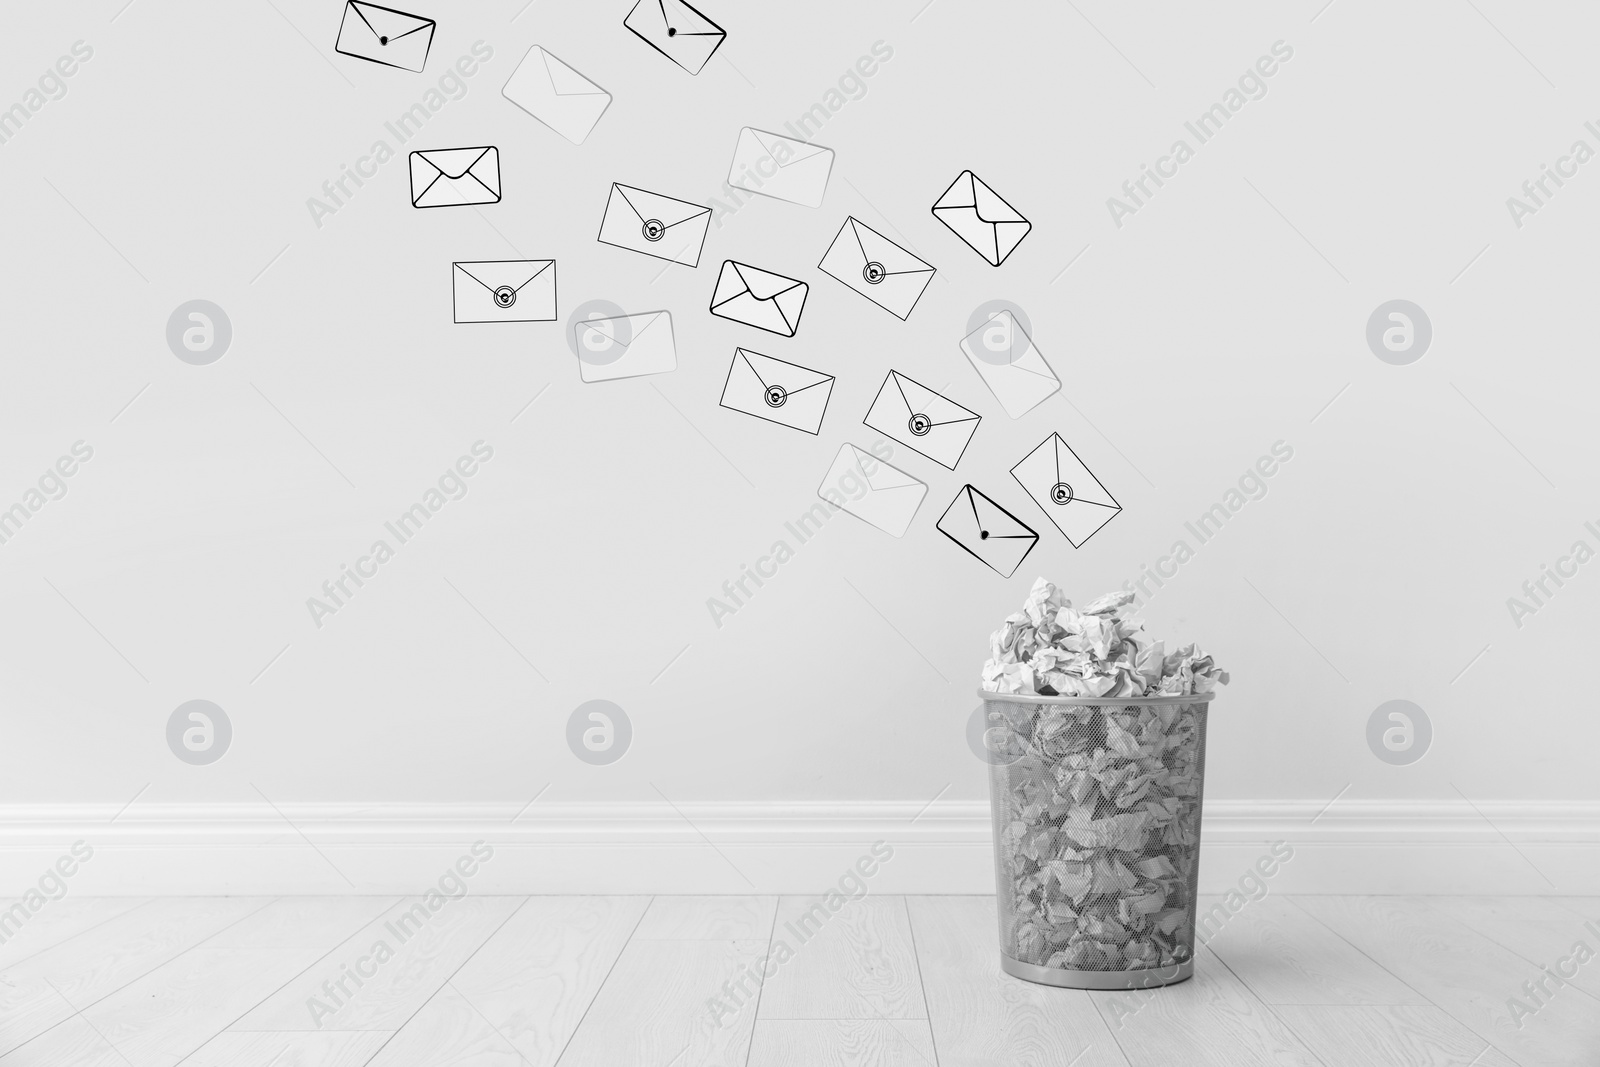 Image of Spam. Drawn envelopes falling into bin with crumpled paper near white wall